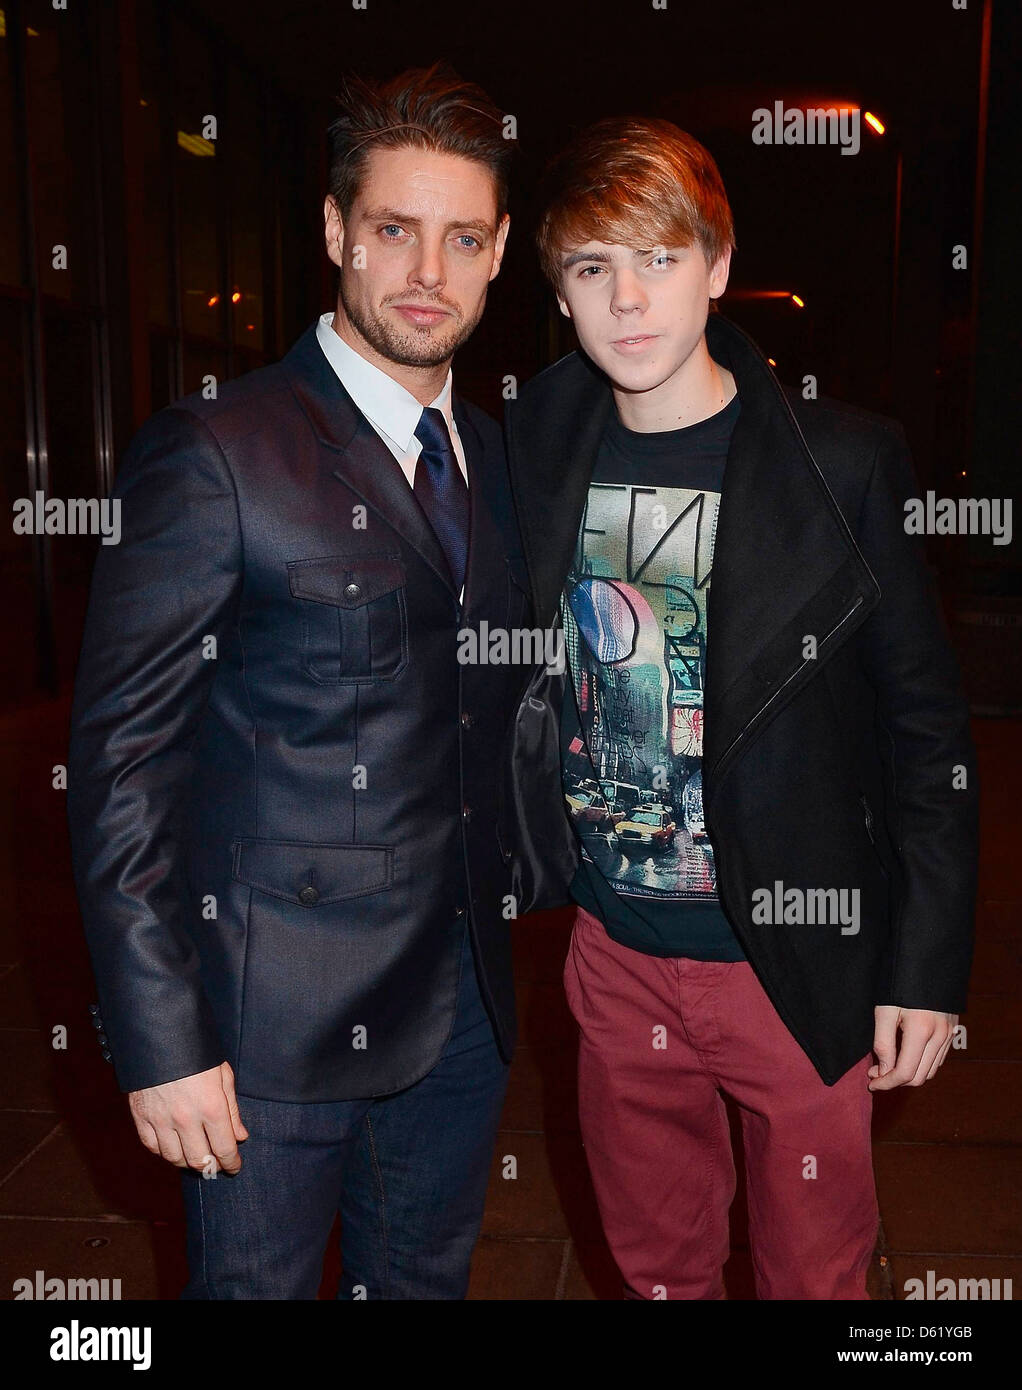 Keith Duffy and Jordan 'Jay' Duffy outside the RTE studios for 'The Late Late Show' Dublin, - 13.01.12 Stock Photo - Alamy